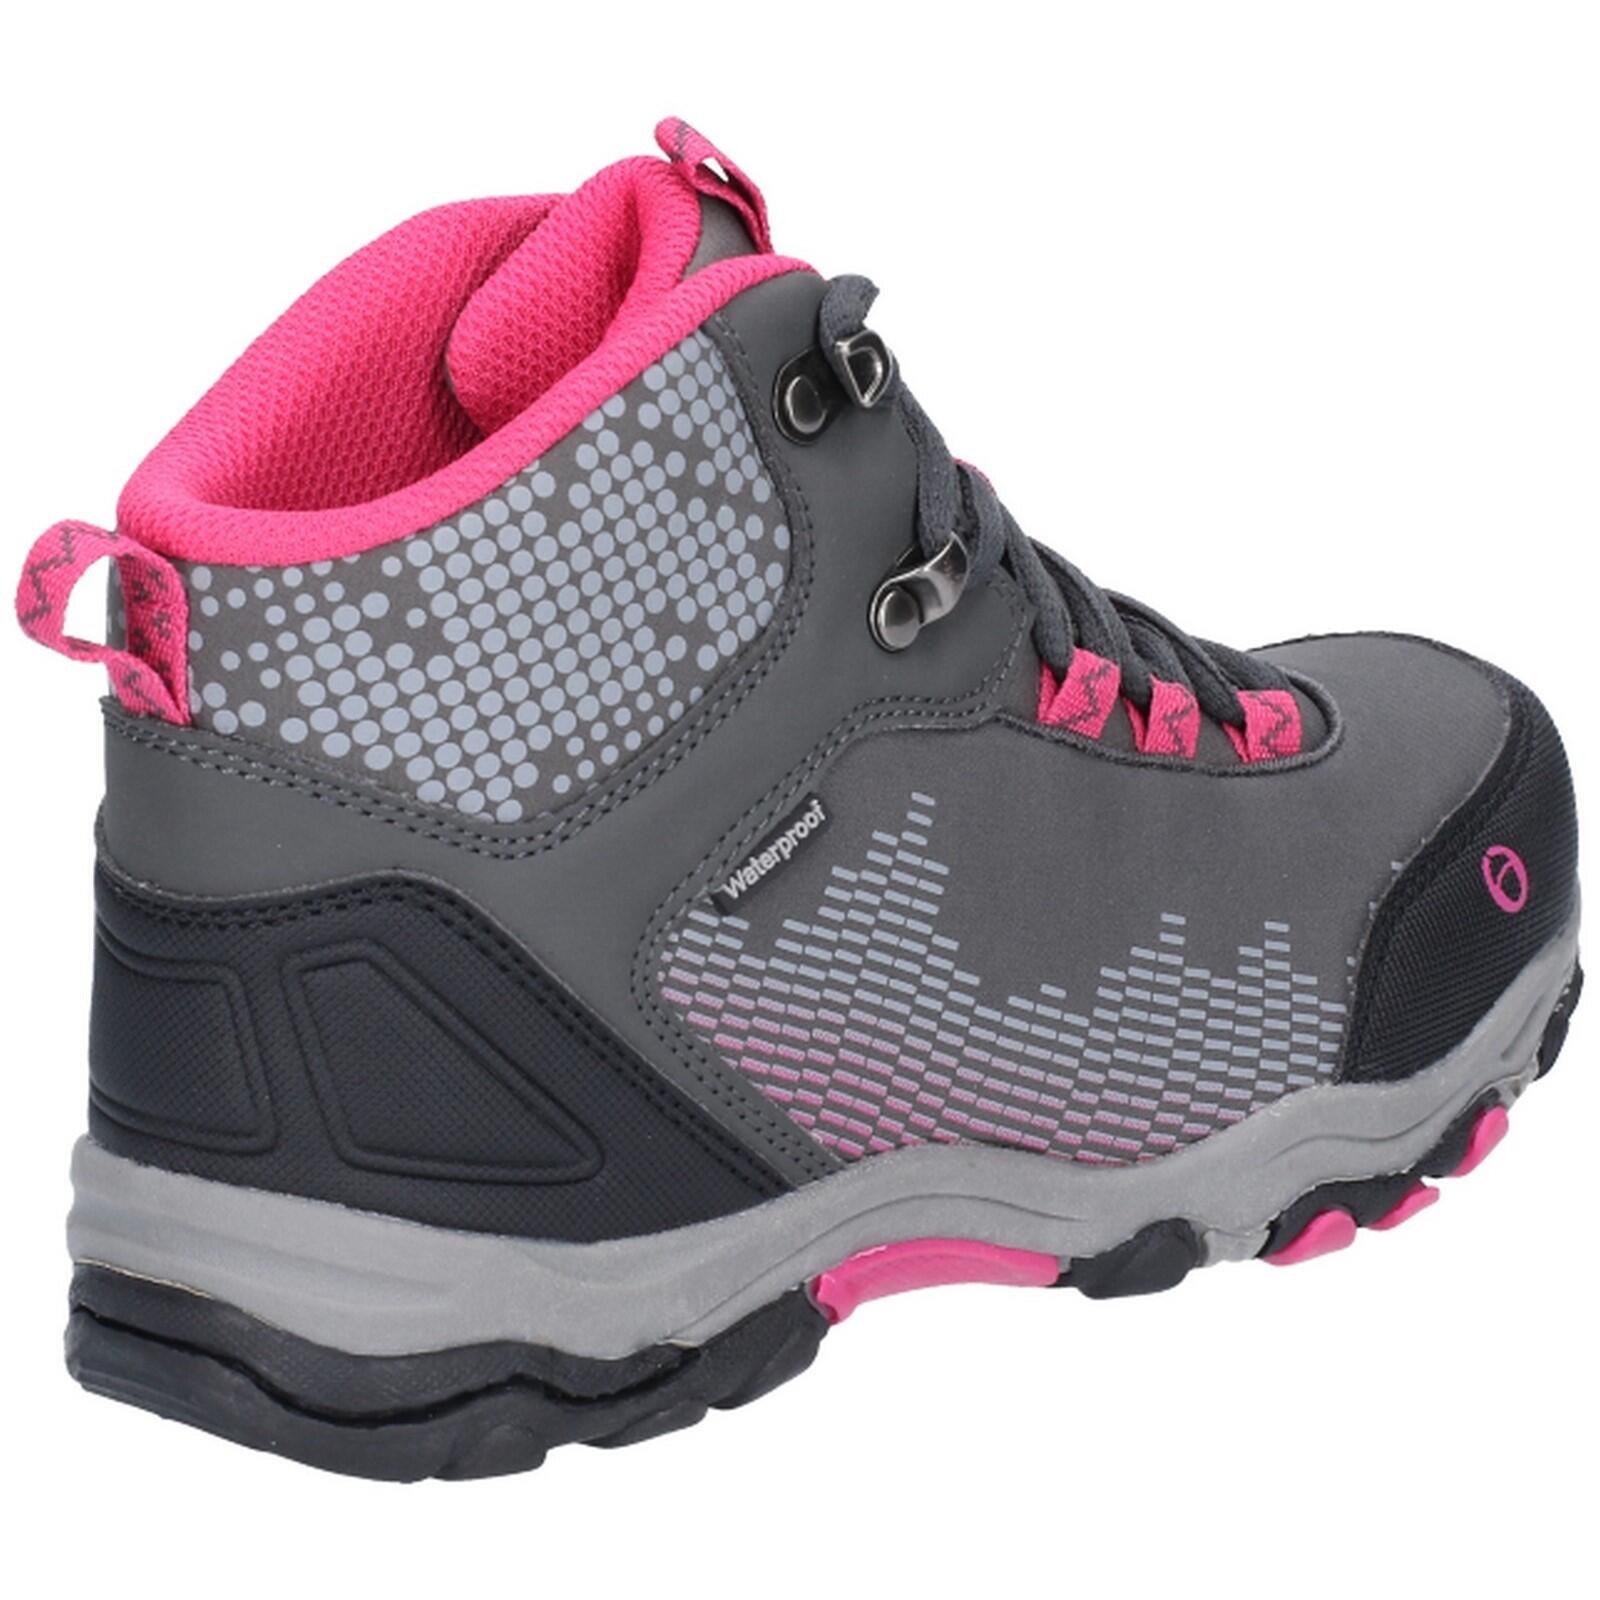 Ducklington Lace Childrens Hiking Boots GREY 3/4